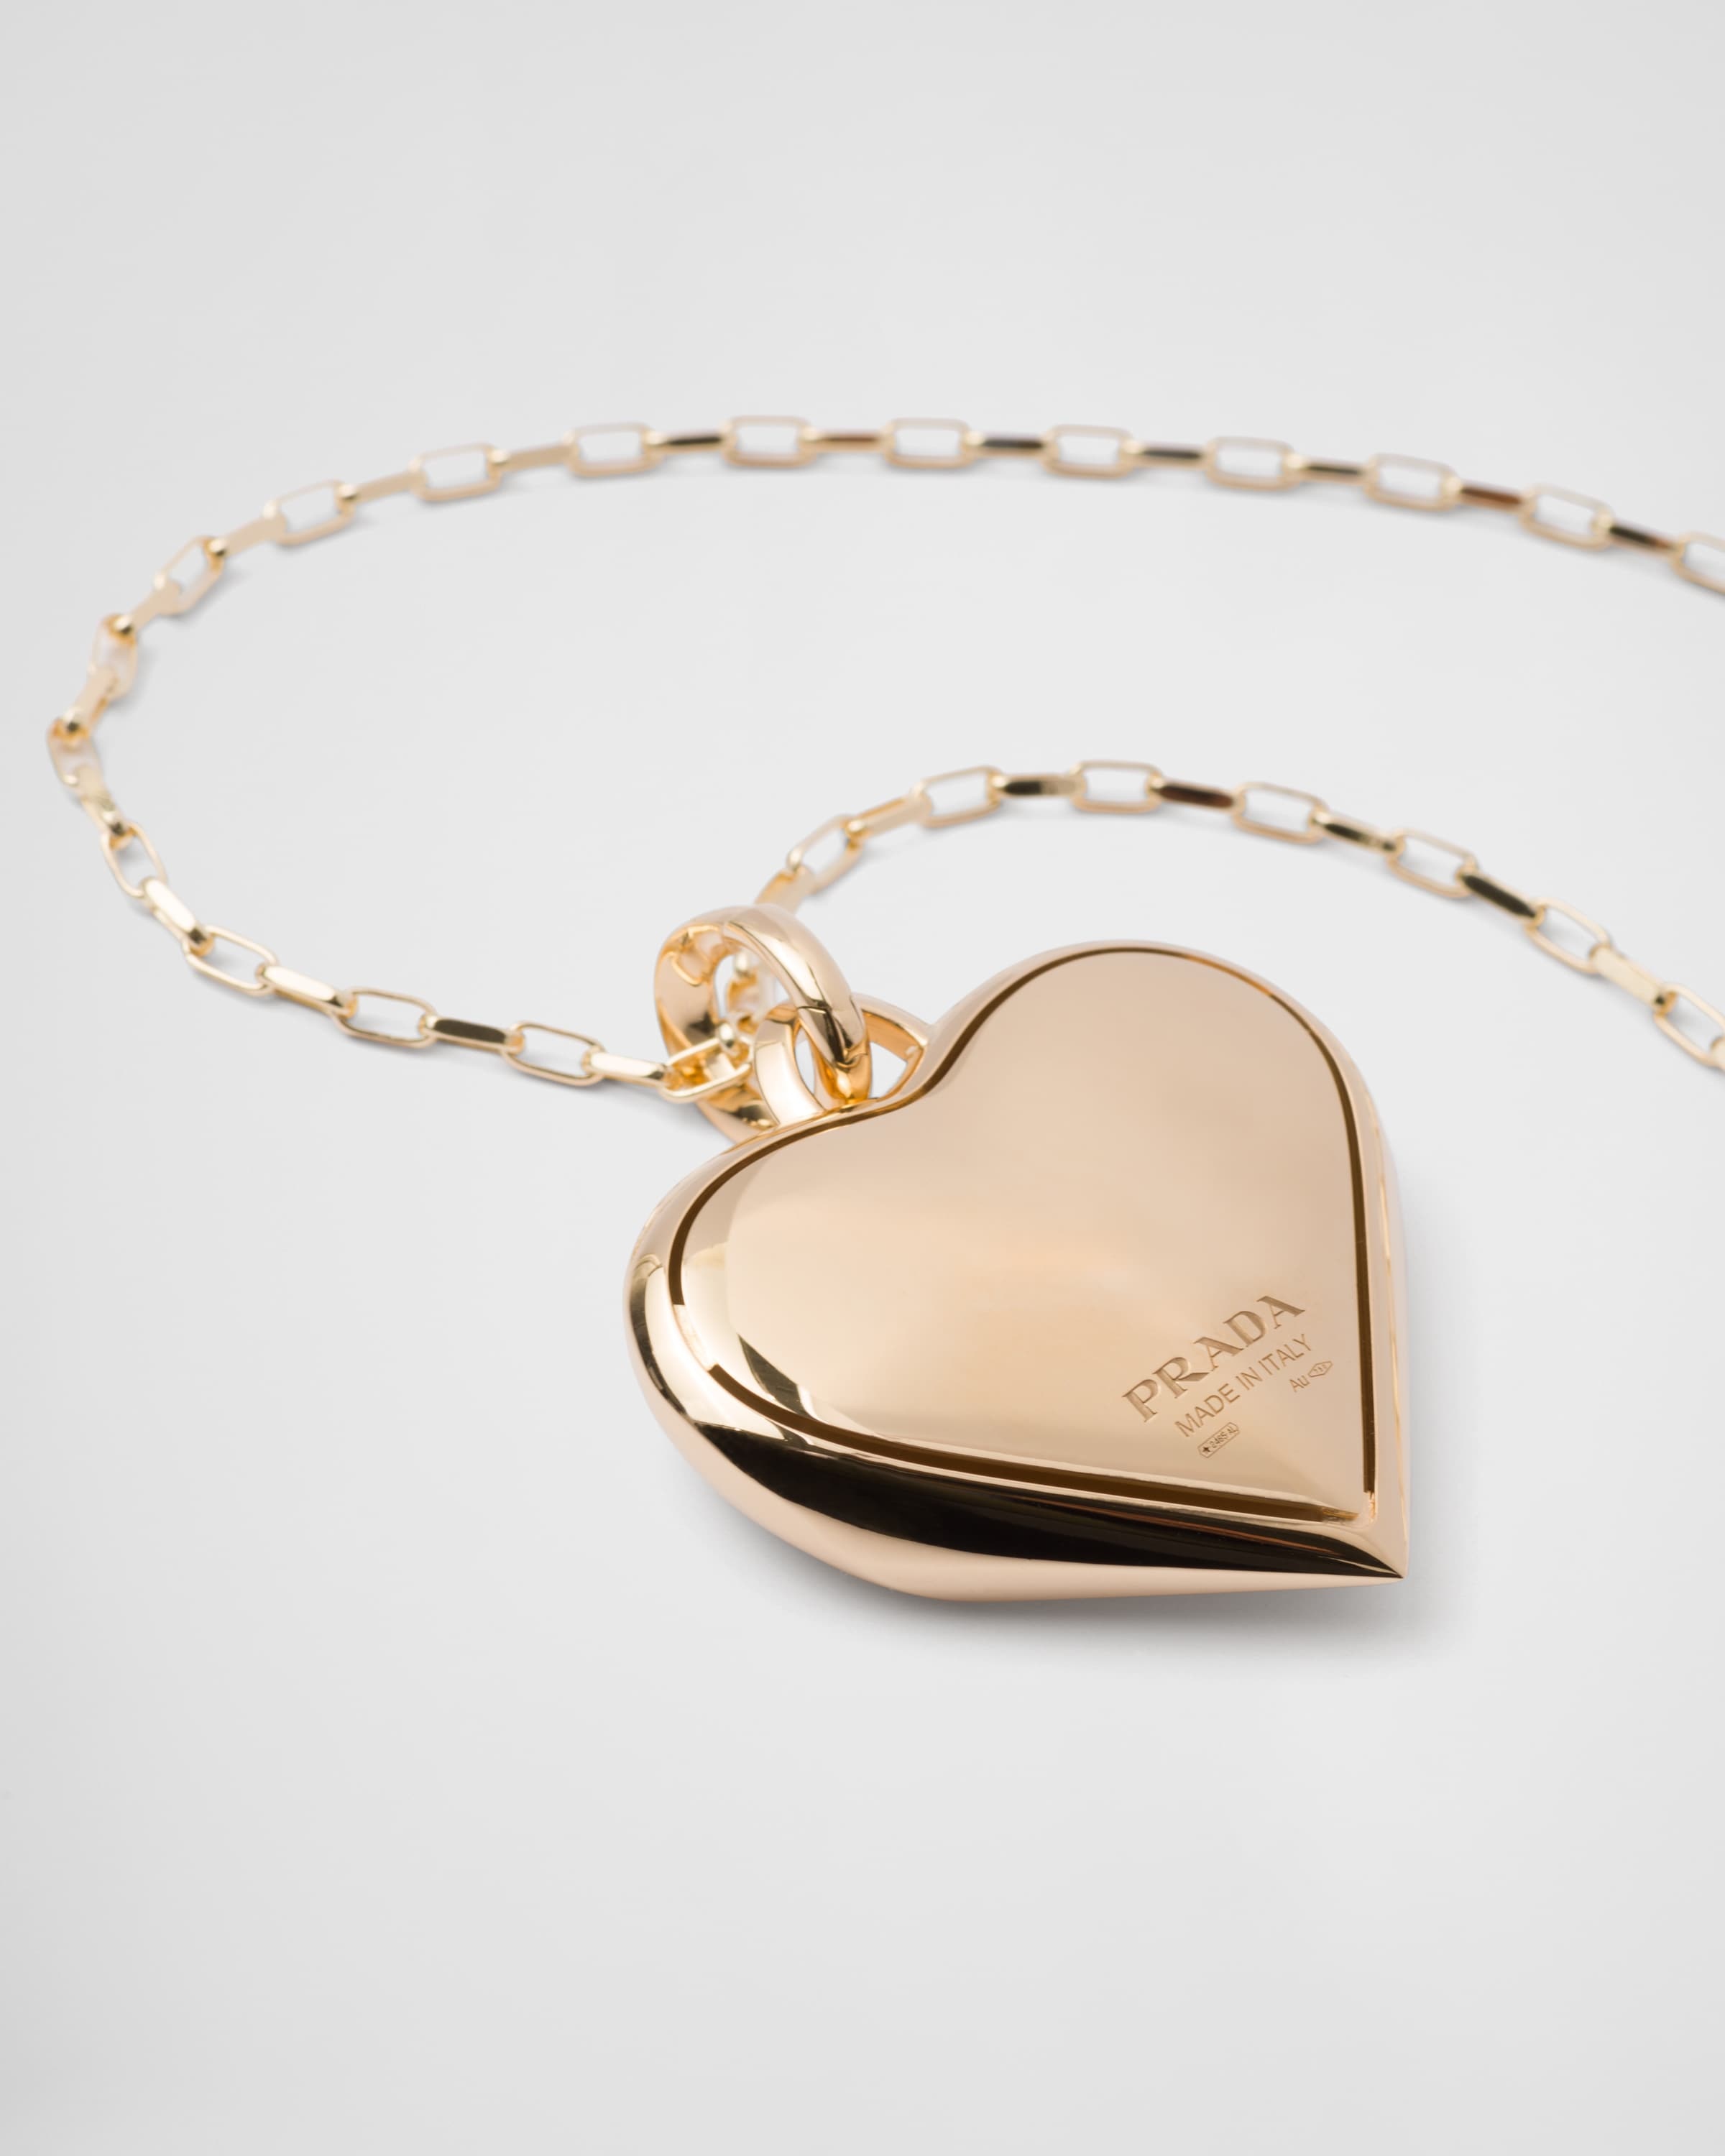 Eternal Gold medium pendant necklace in yellow gold - 3